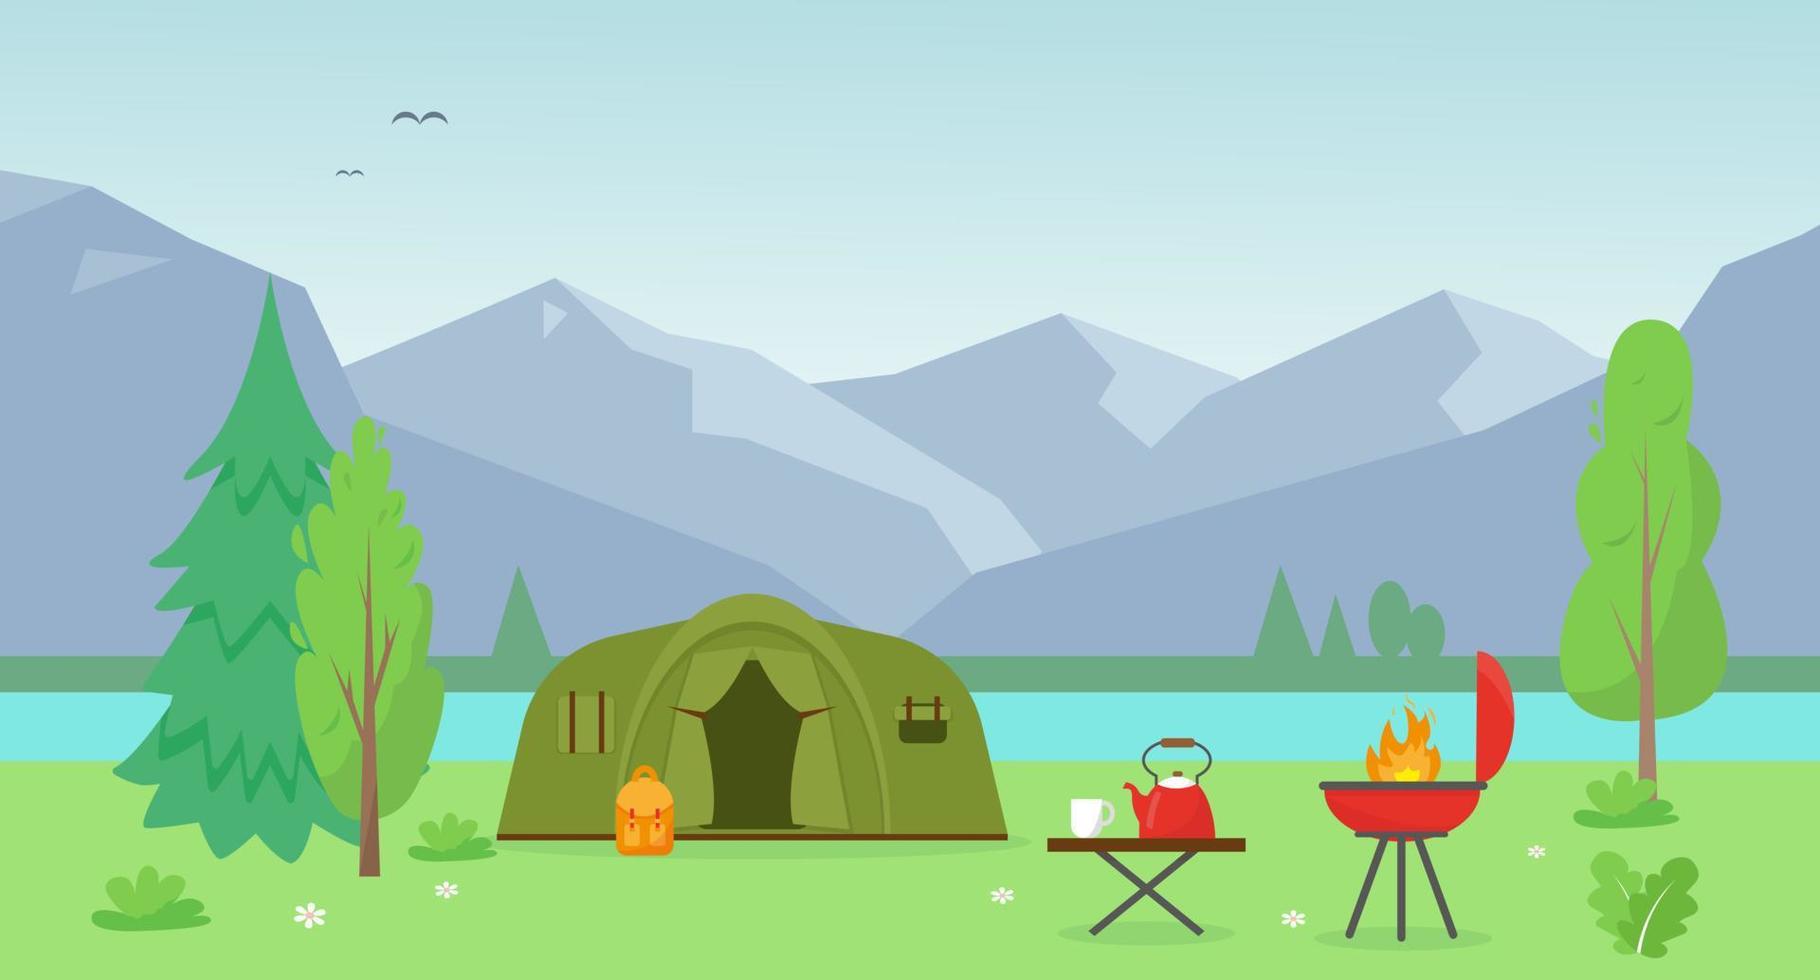 Camping tent near the lake and mountains. Summer or spring landscape. Time to travel concept. Vector background illustration.